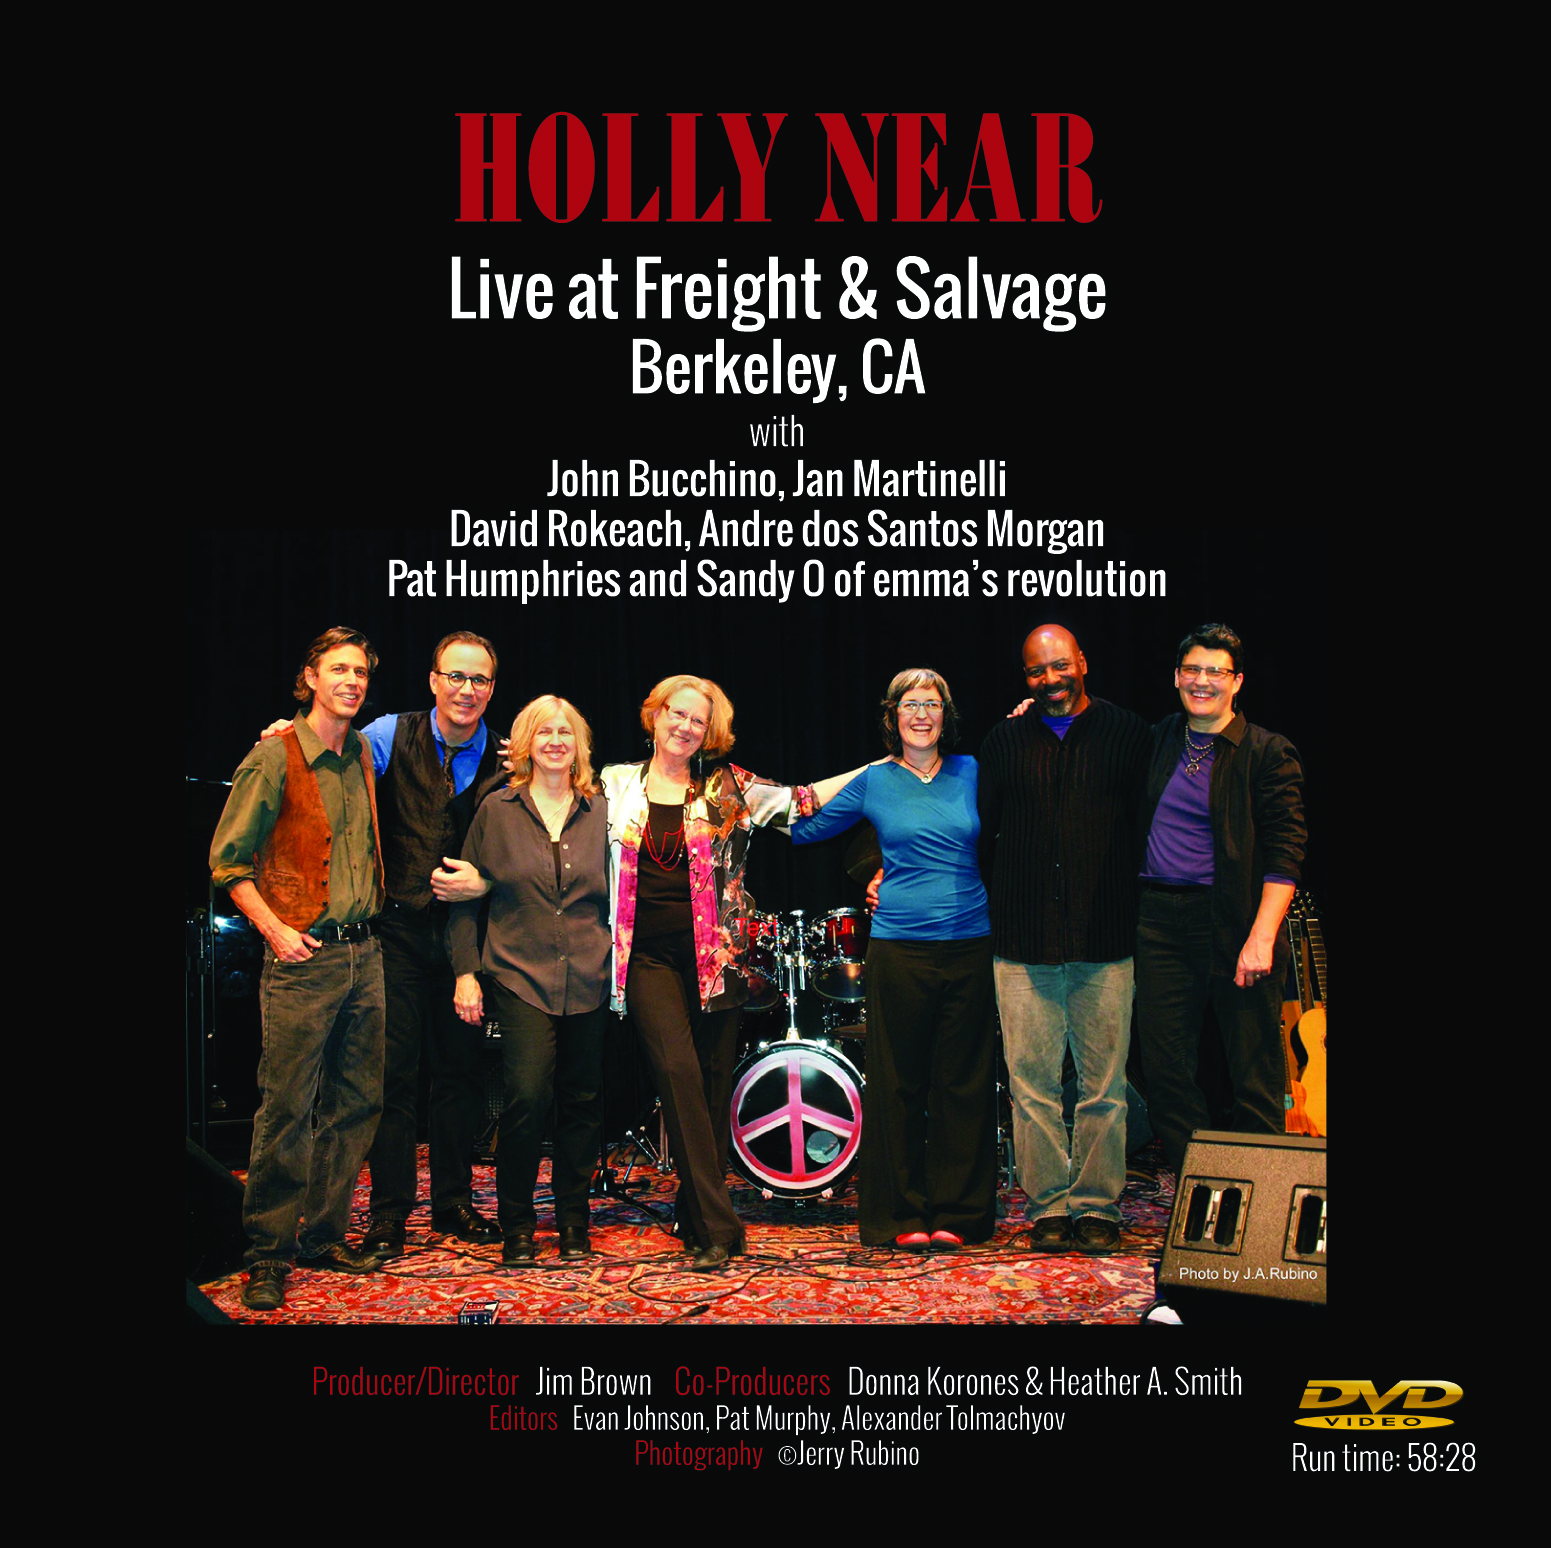 Live at Freight & Salvage